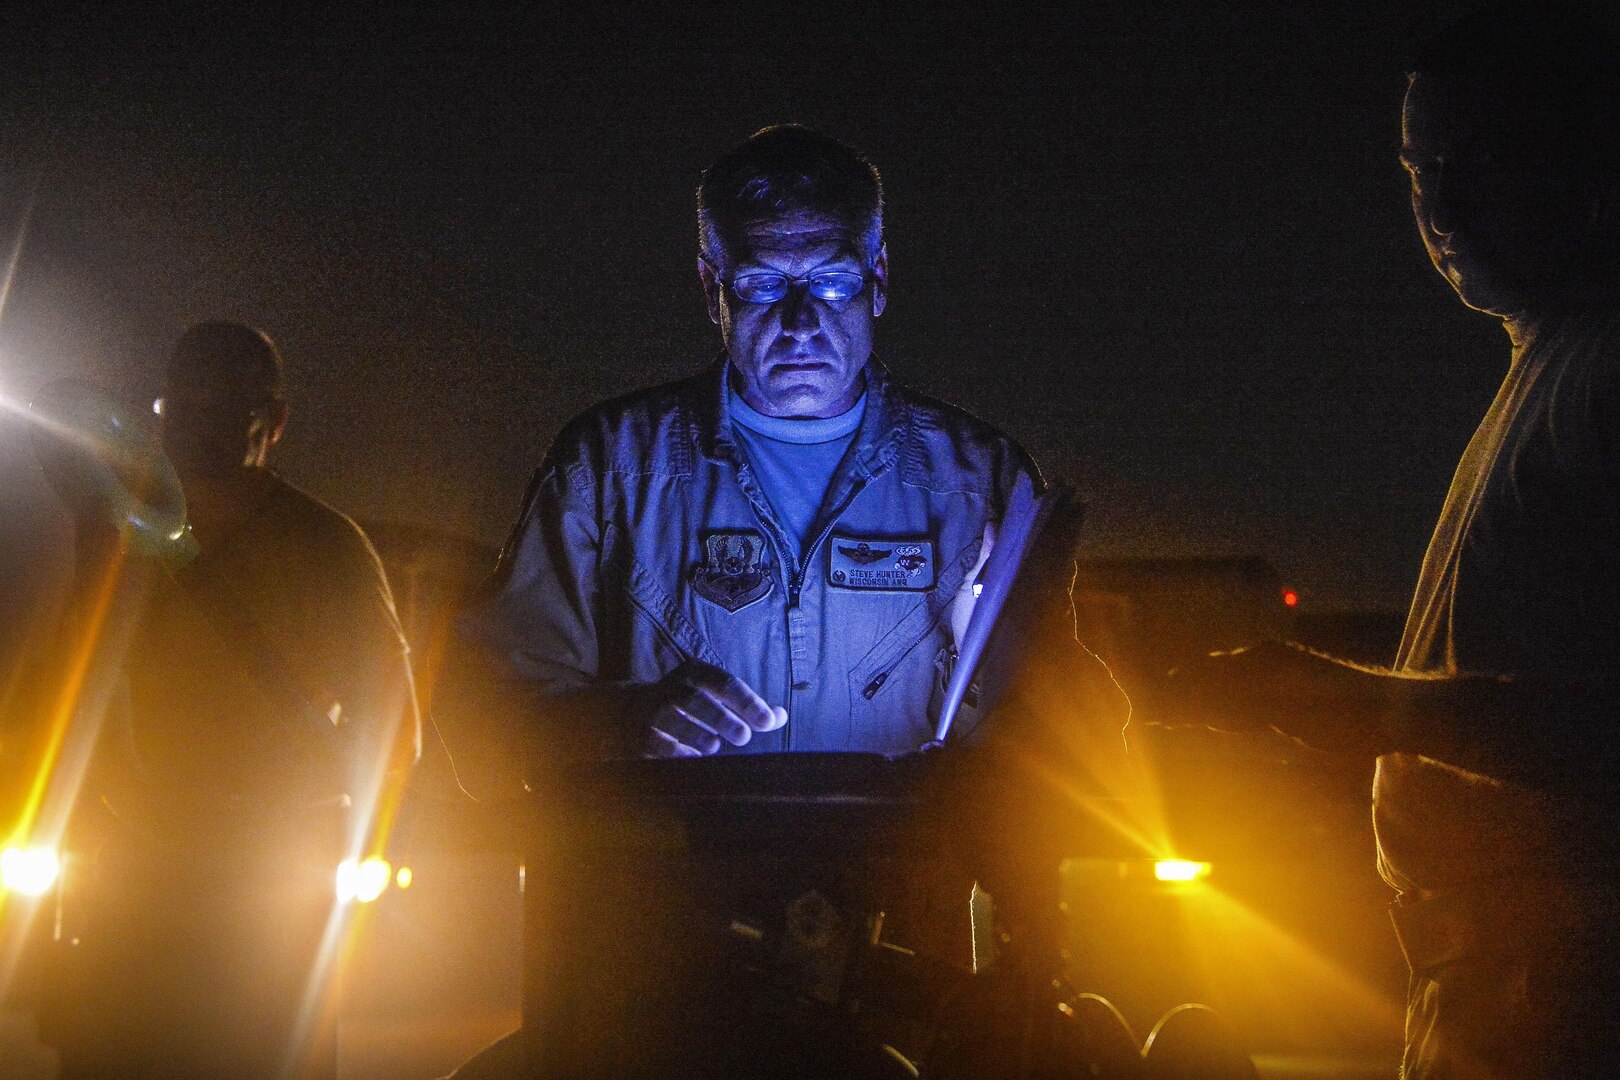 An airman reviews records at night as lights shine from below.